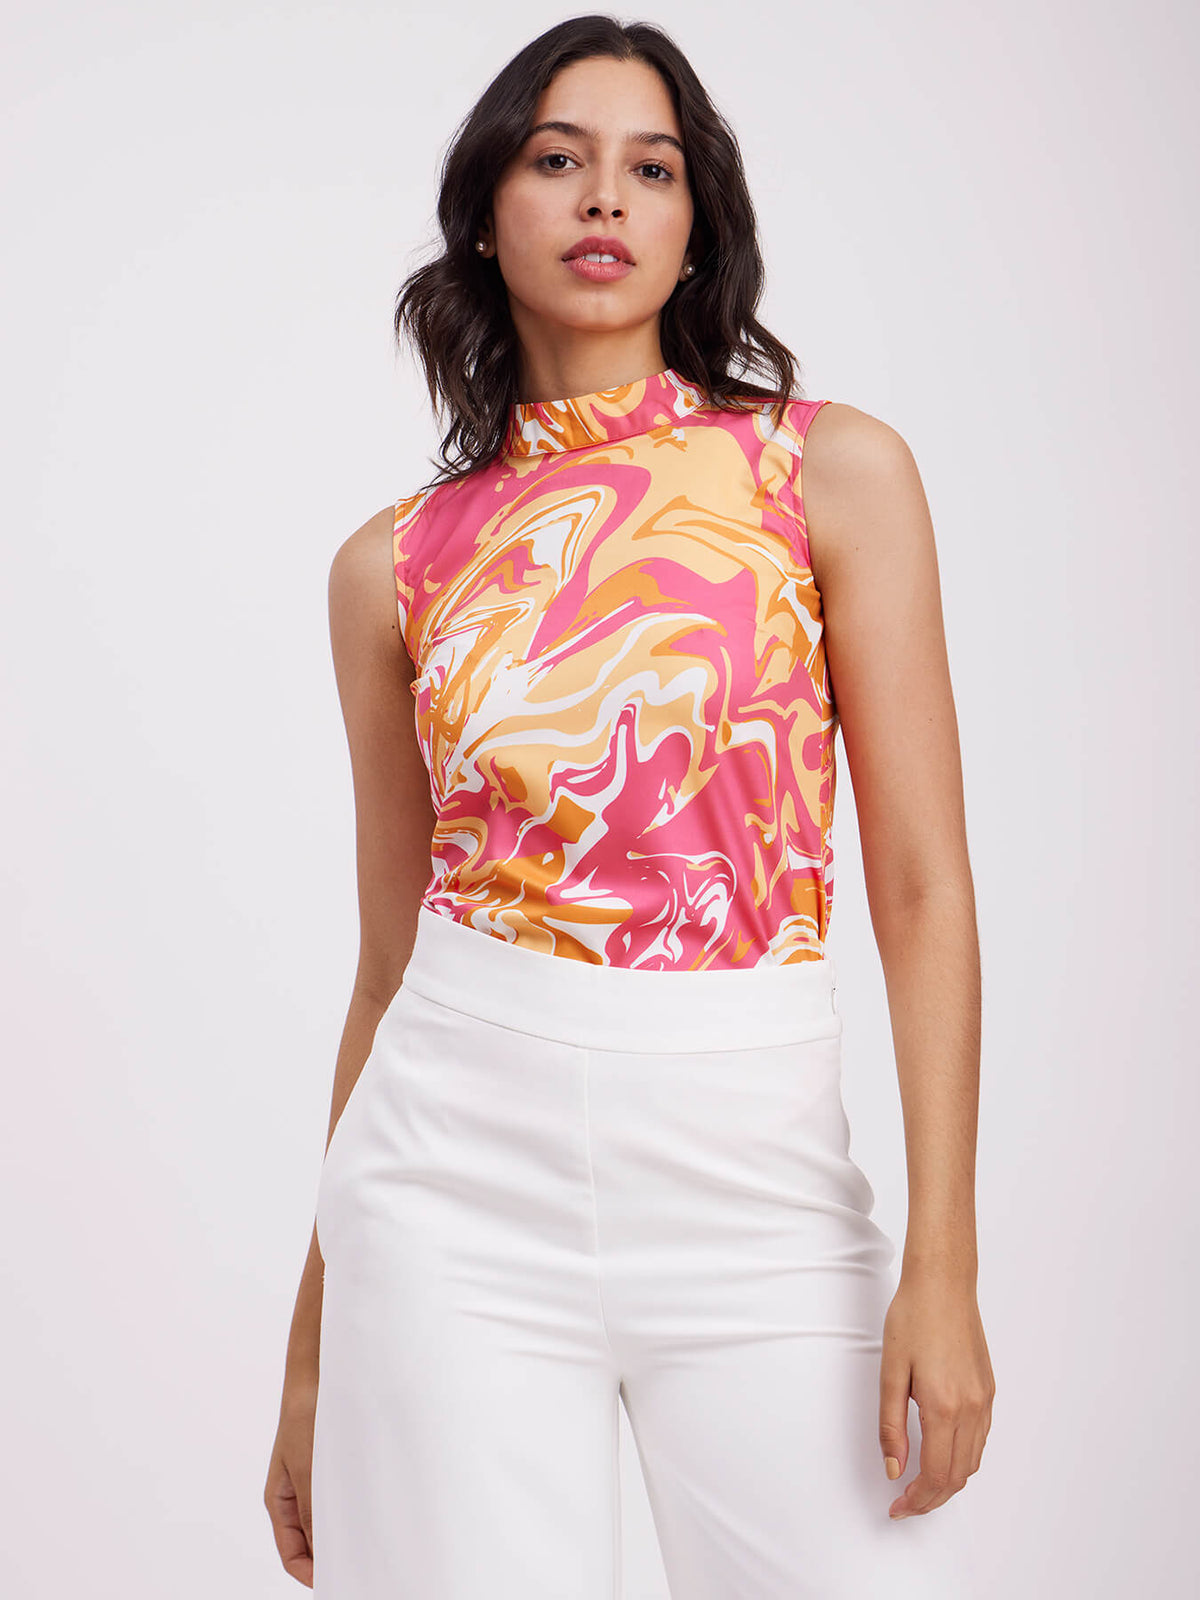 Abstract Print High Neck Top - Orange And Pink